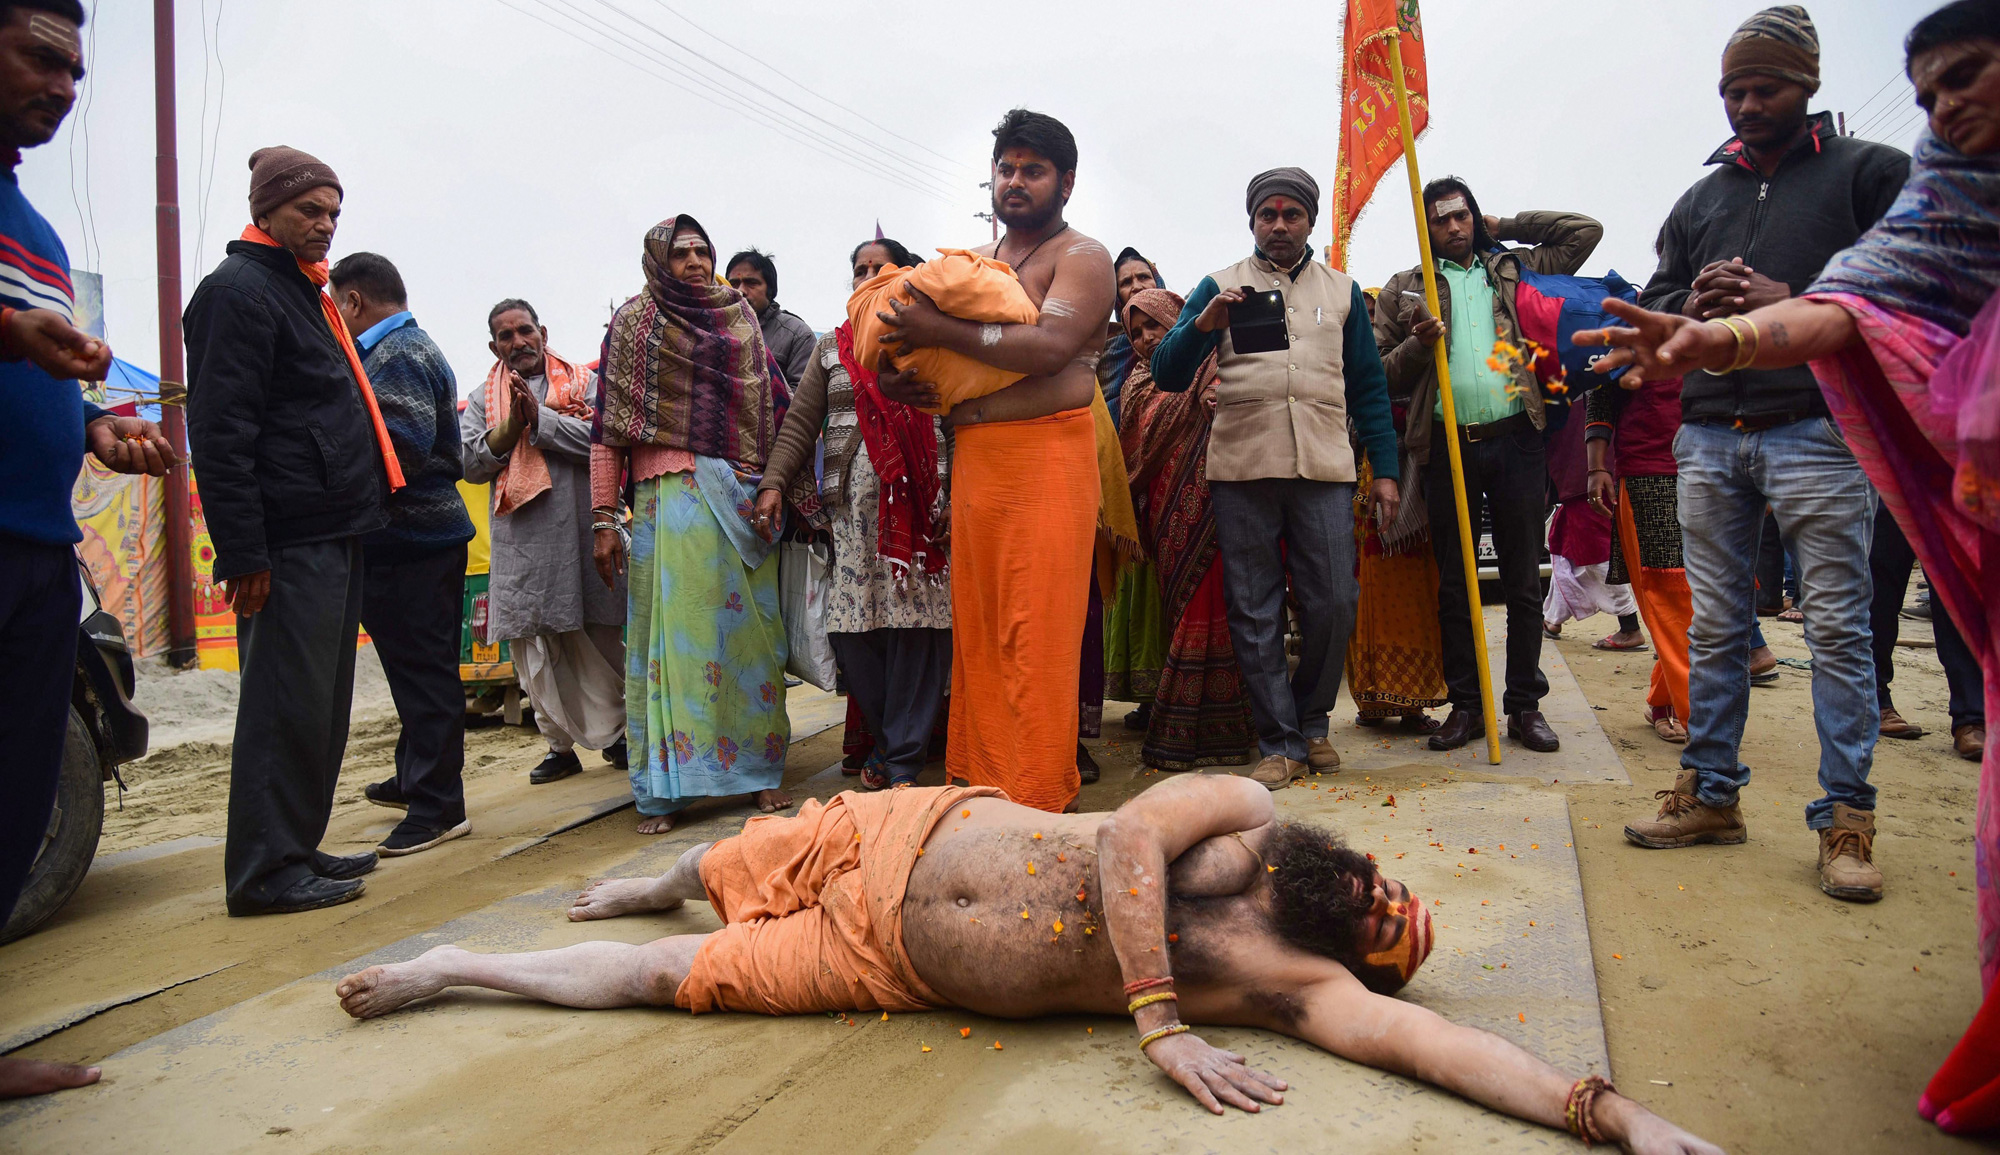 A sadhu rolls on the road as an appeal to build Ram Mandir at Ayodhya, during Kumbh Mela in Allahabad on Sunday, January 27, 2019. 